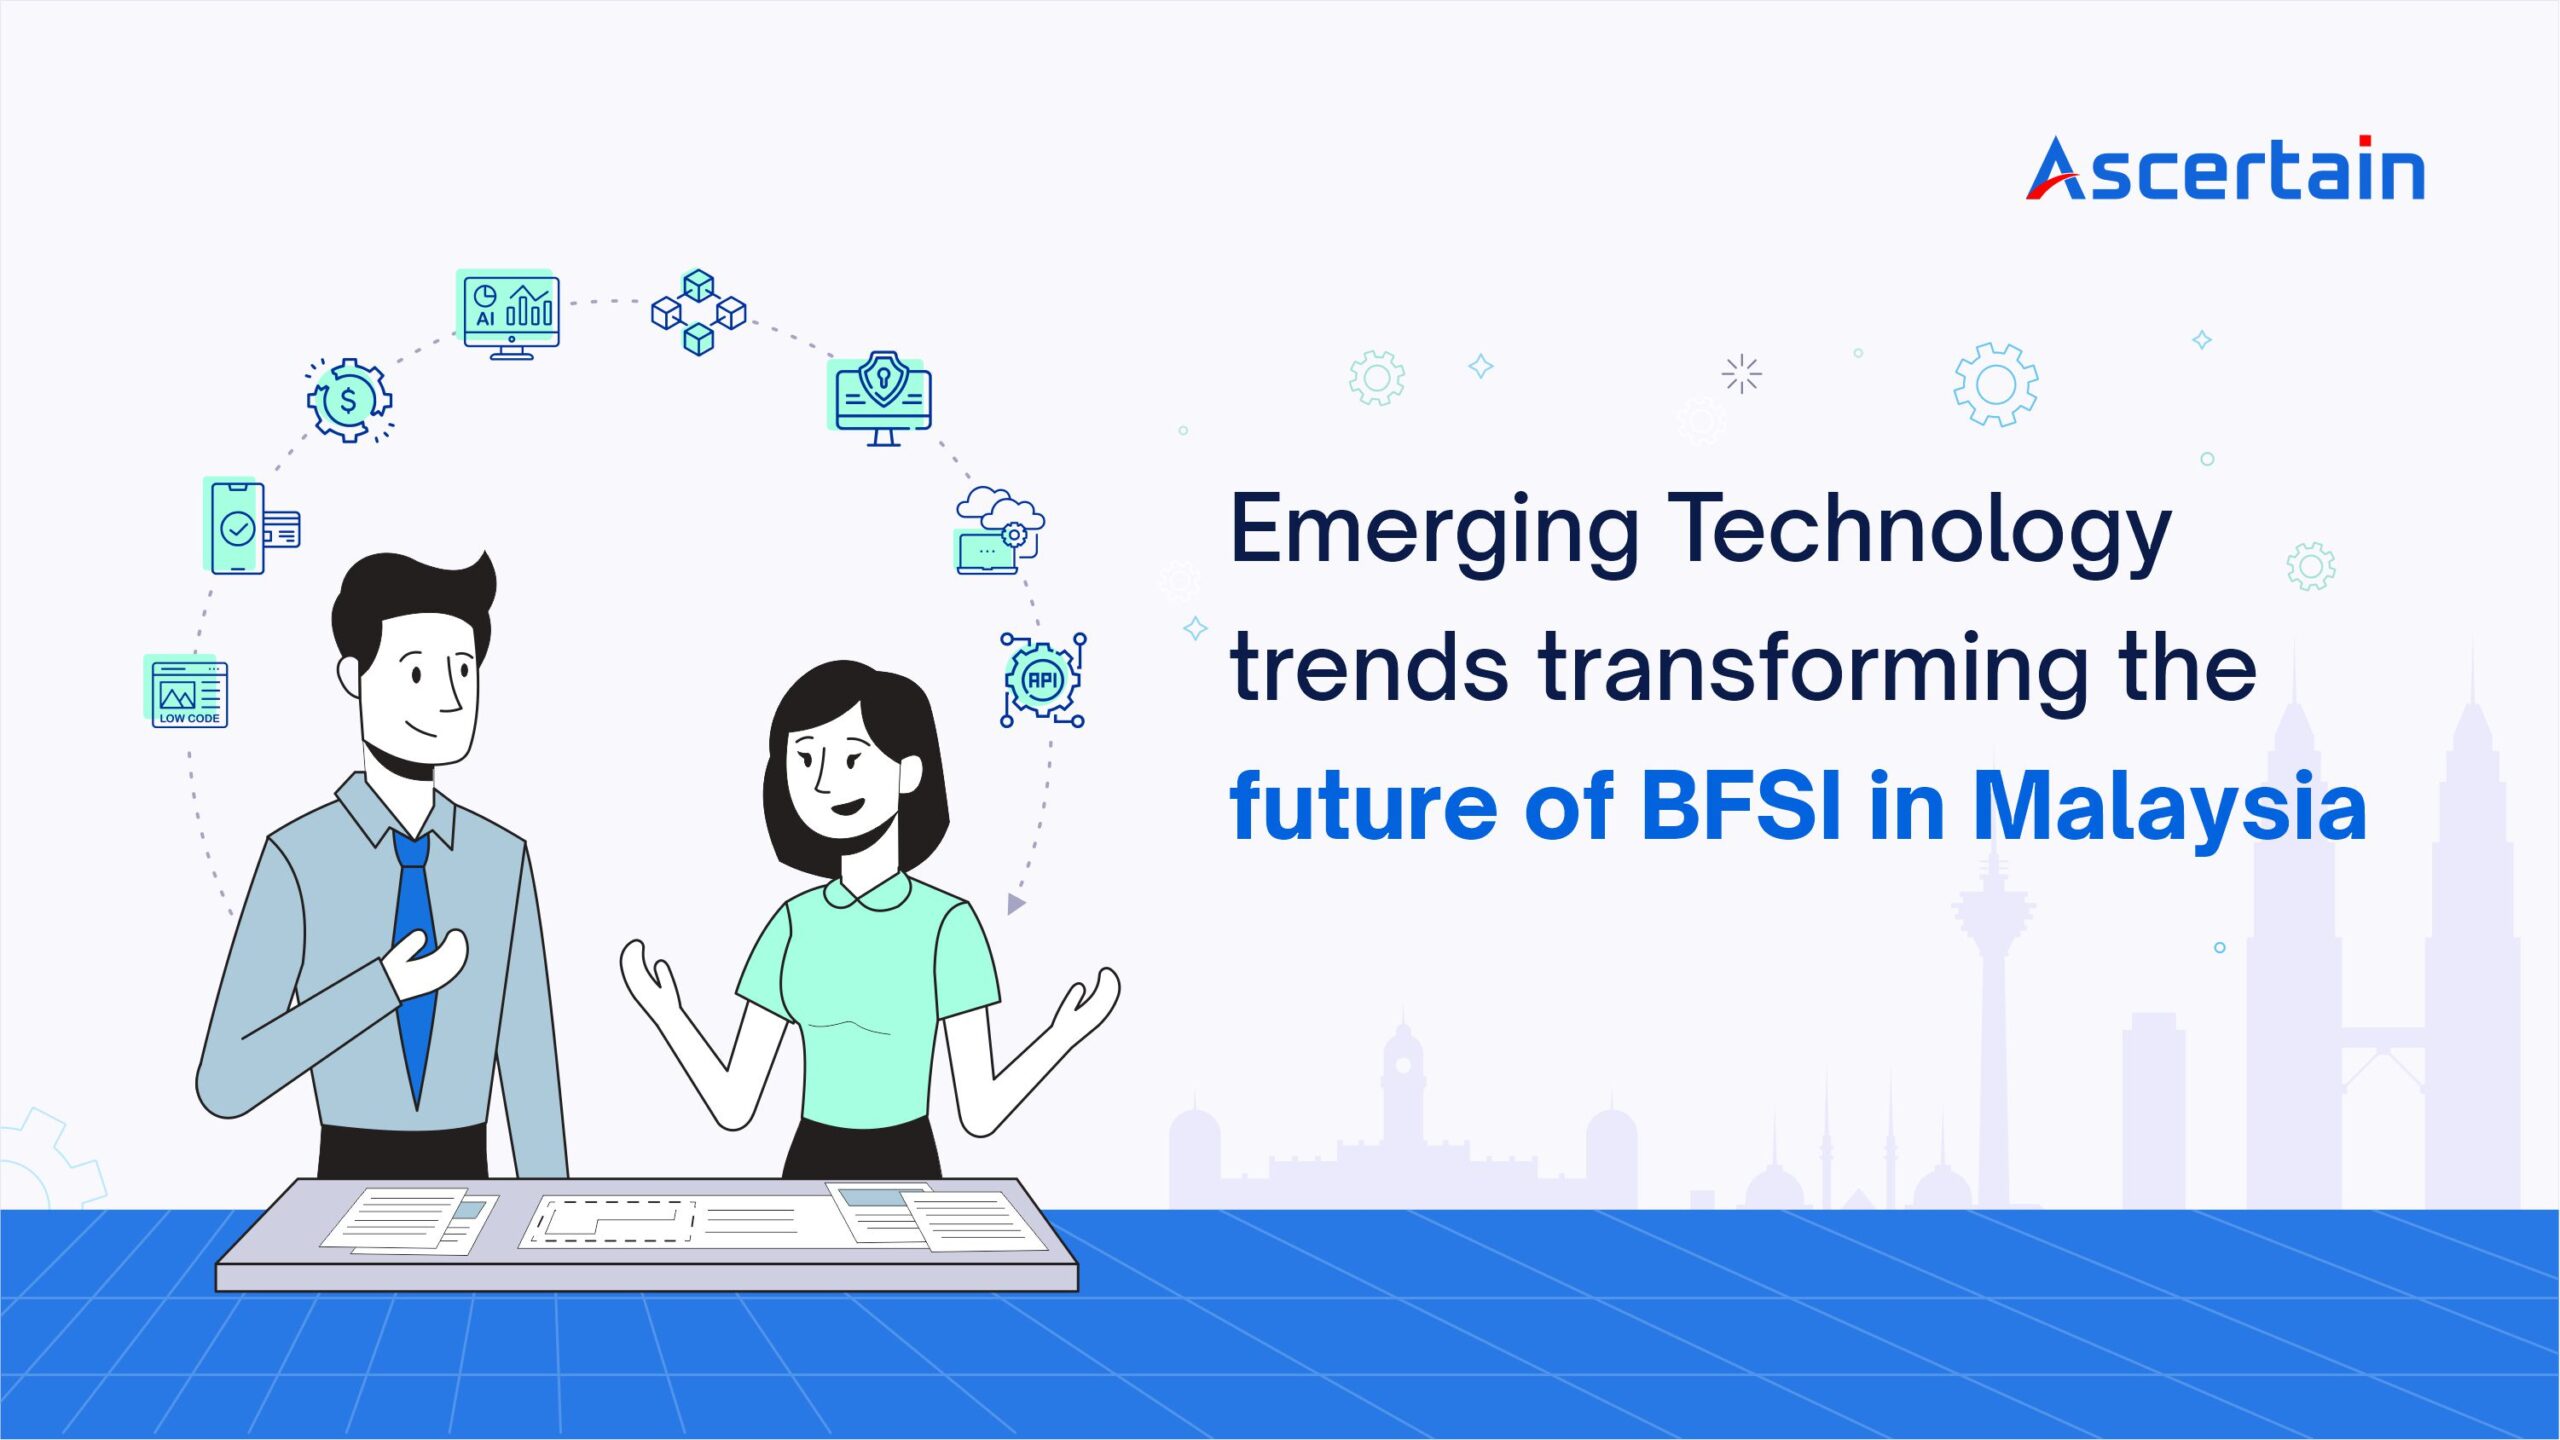 Emerging Technology trends transforming BFSI in Malaysia 